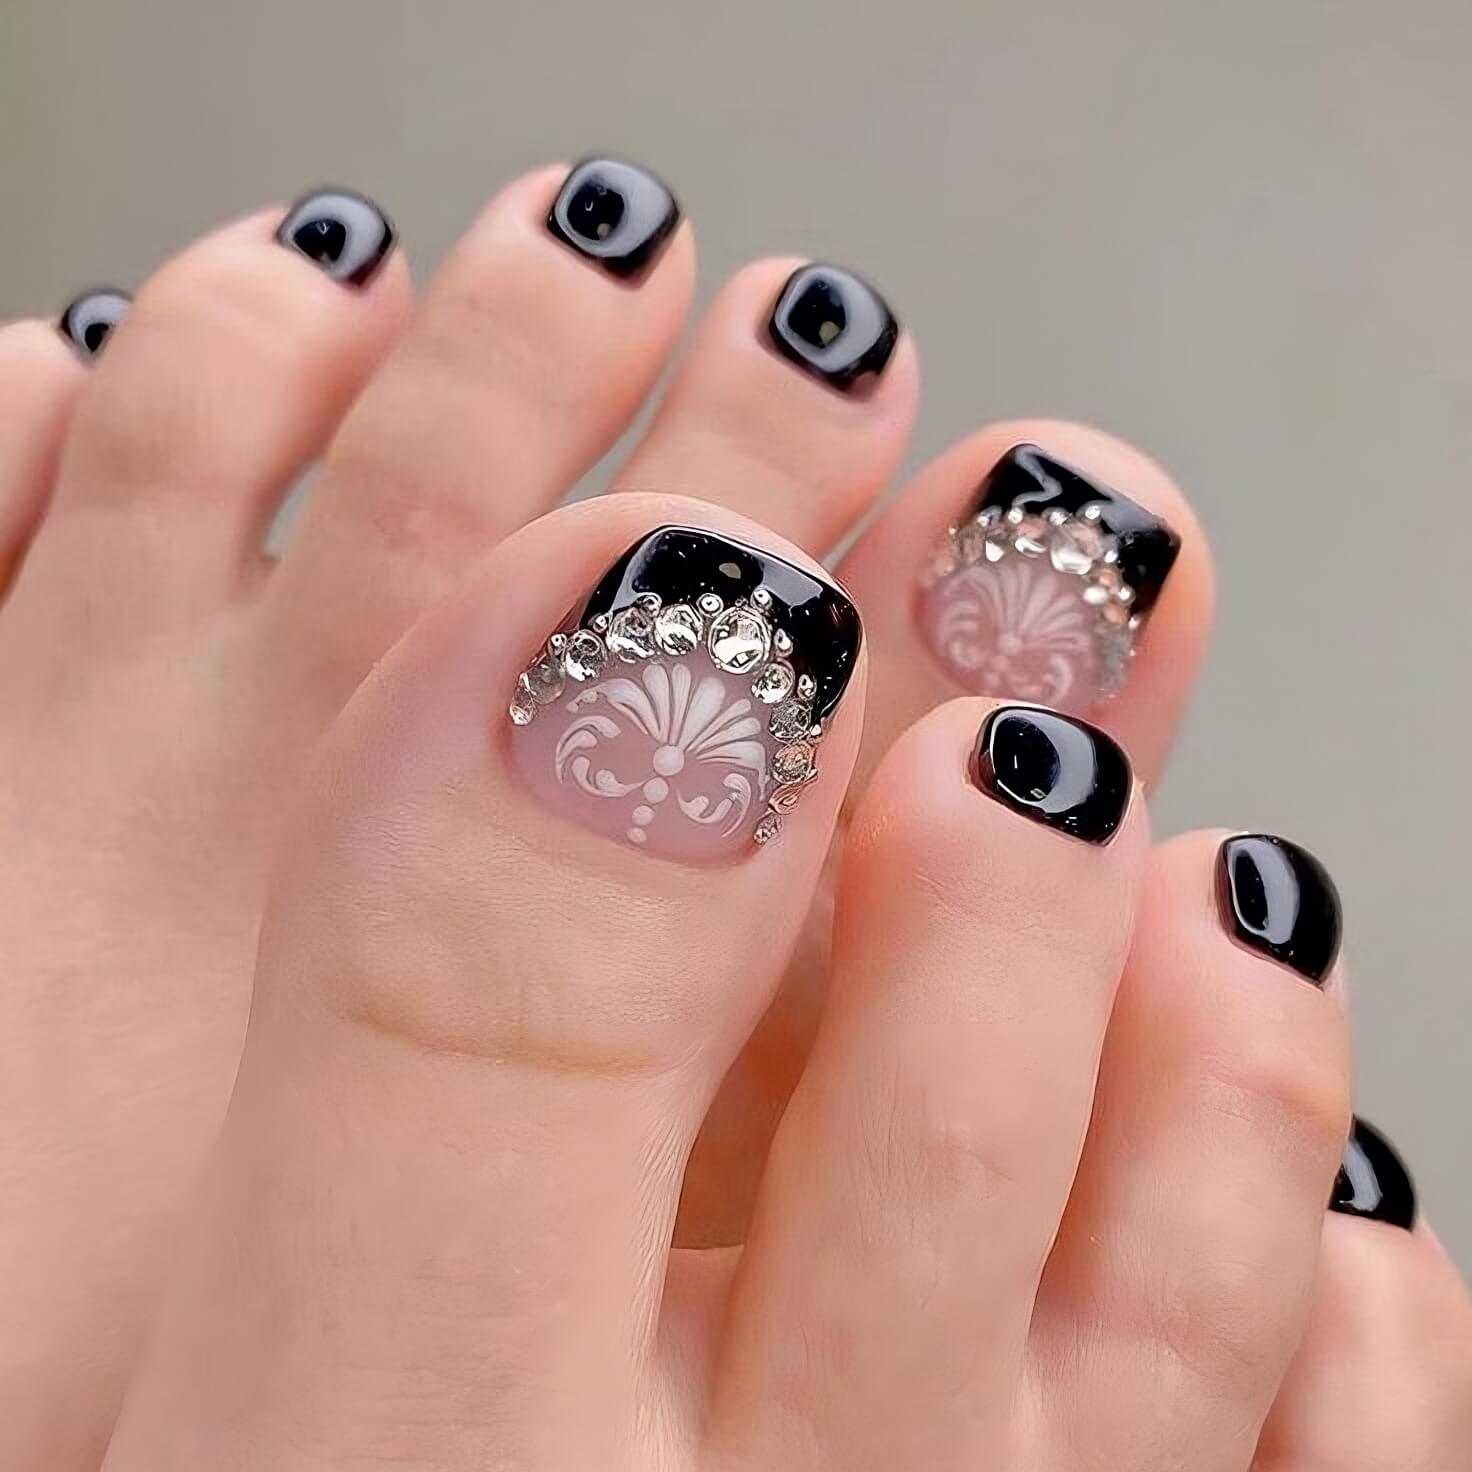 35 Charming Toenail Designs to Brighten Your Day – The Daily Worlds